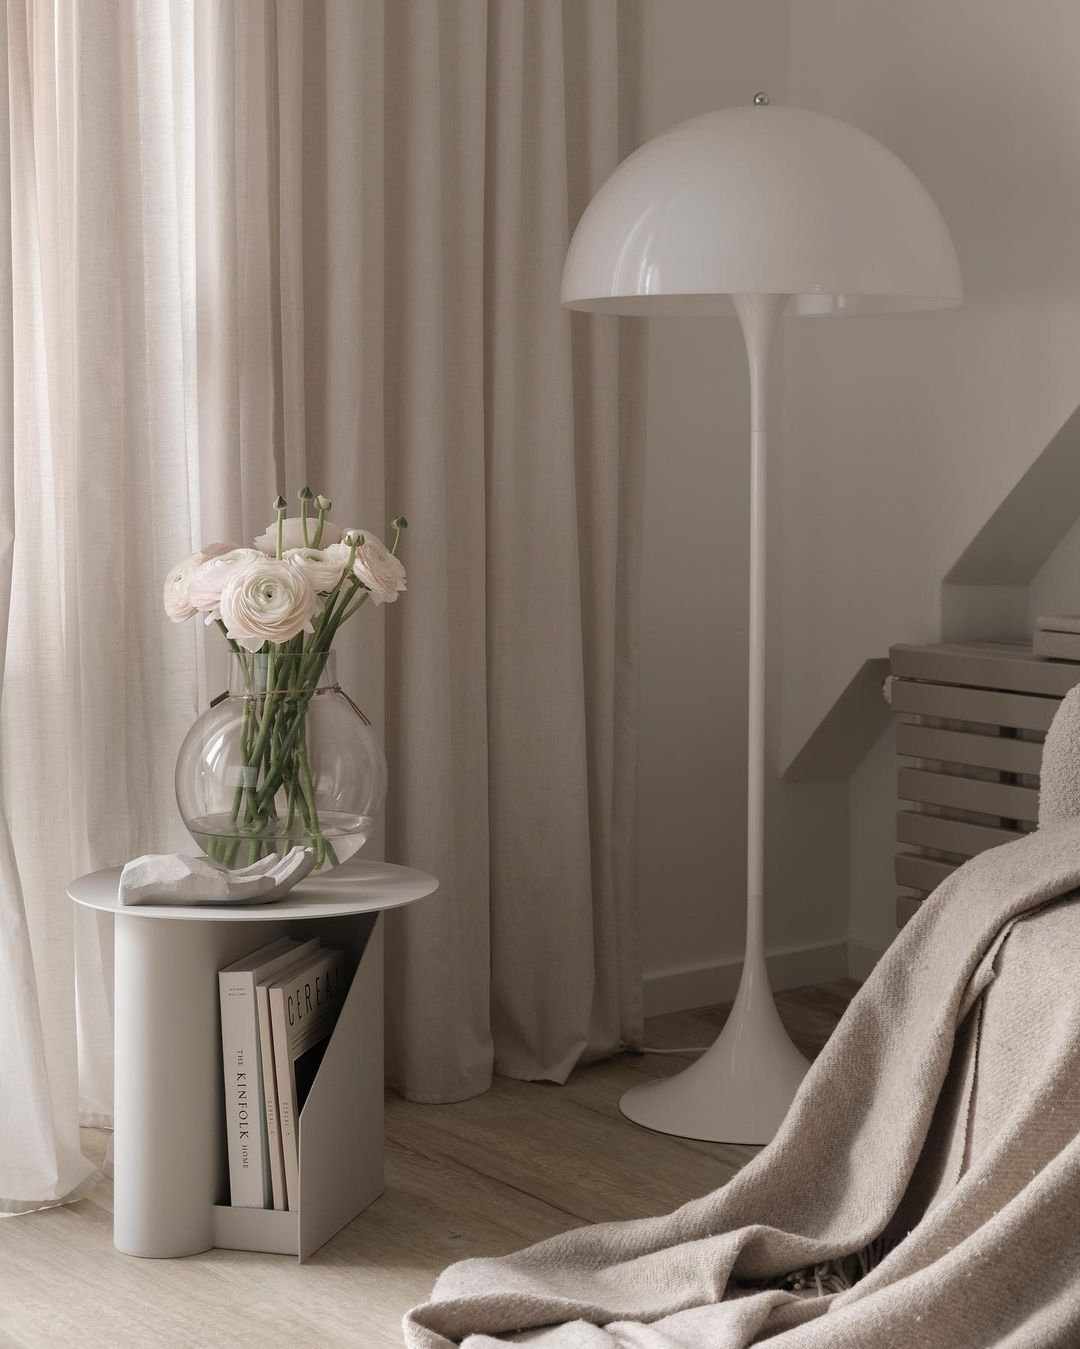 Floor Lamp White : Floor Lamp White The Perfect Addition To Any Room décor